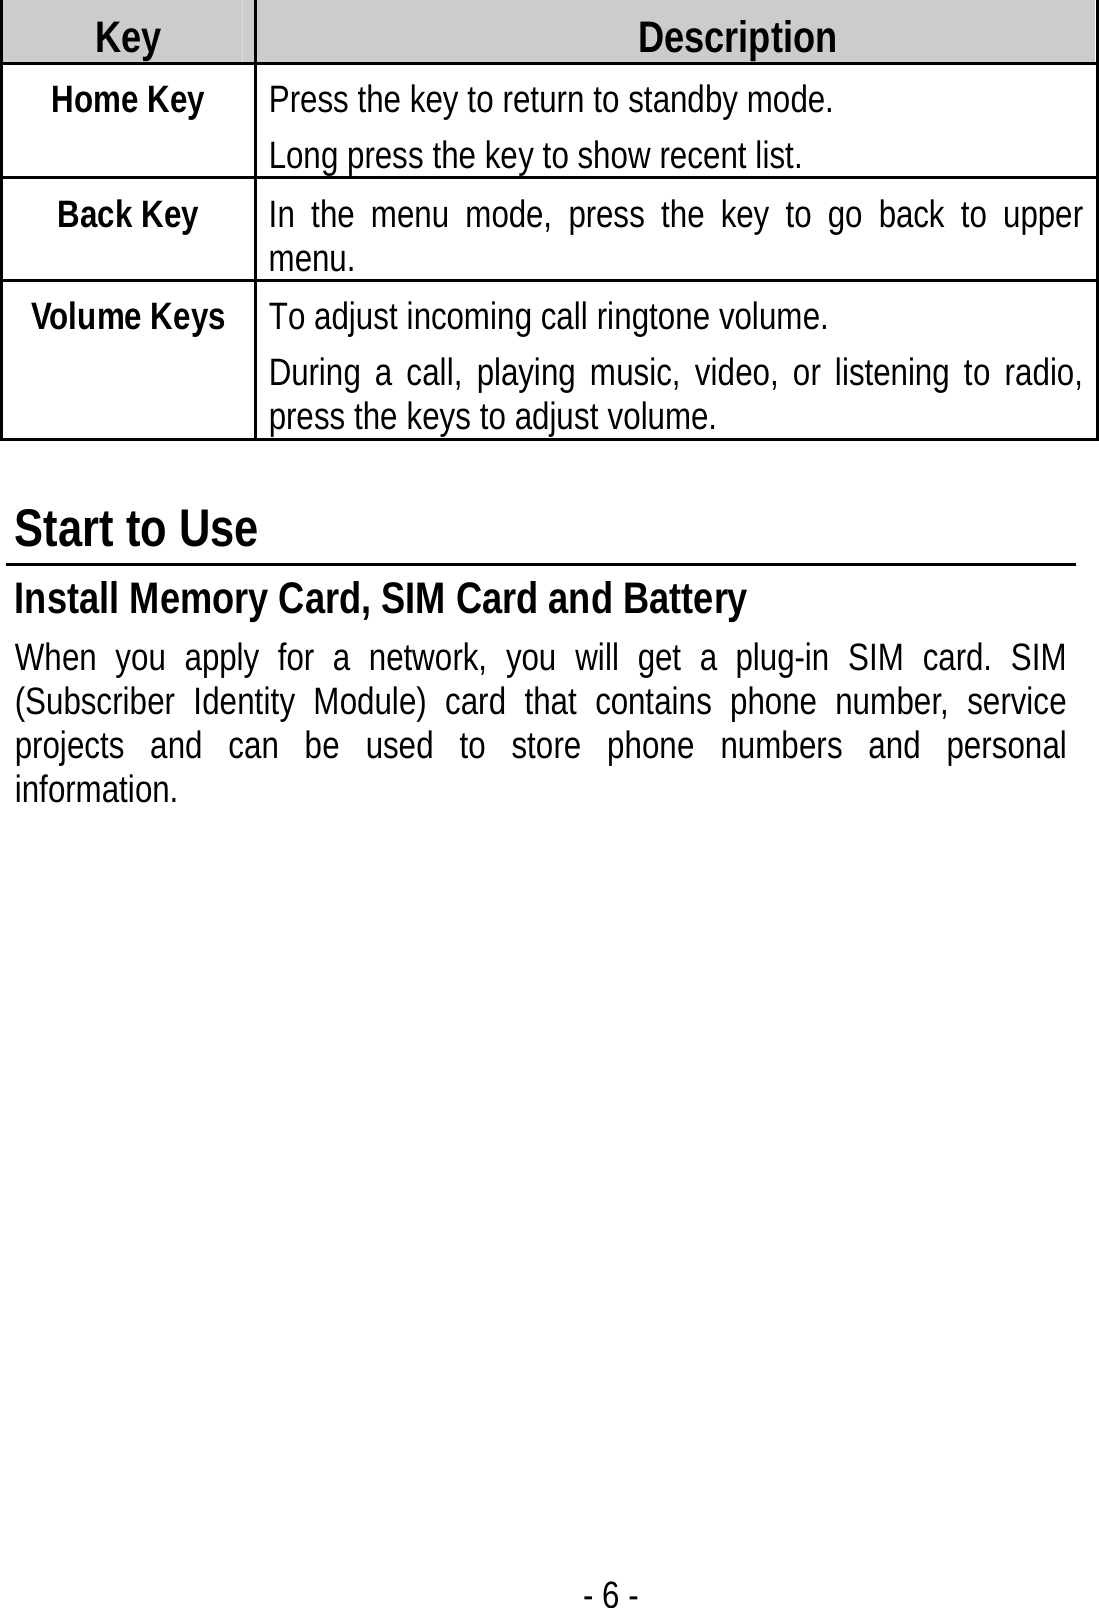  - 6 - Key  Description Home Key  Press the key to return to standby mode. Long press the key to show recent list.   Back Key  In the menu mode, press the key to go back to upper menu. Volume Keys  To adjust incoming call ringtone volume. During a call, playing music, video, or listening to radio, press the keys to adjust volume.  Start to Use Install Memory Card, SIM Card and Battery When you apply for a network, you will get a plug-in SIM card. SIM (Subscriber Identity Module) card that contains phone number, service projects and can be used to store phone numbers and personal information.  